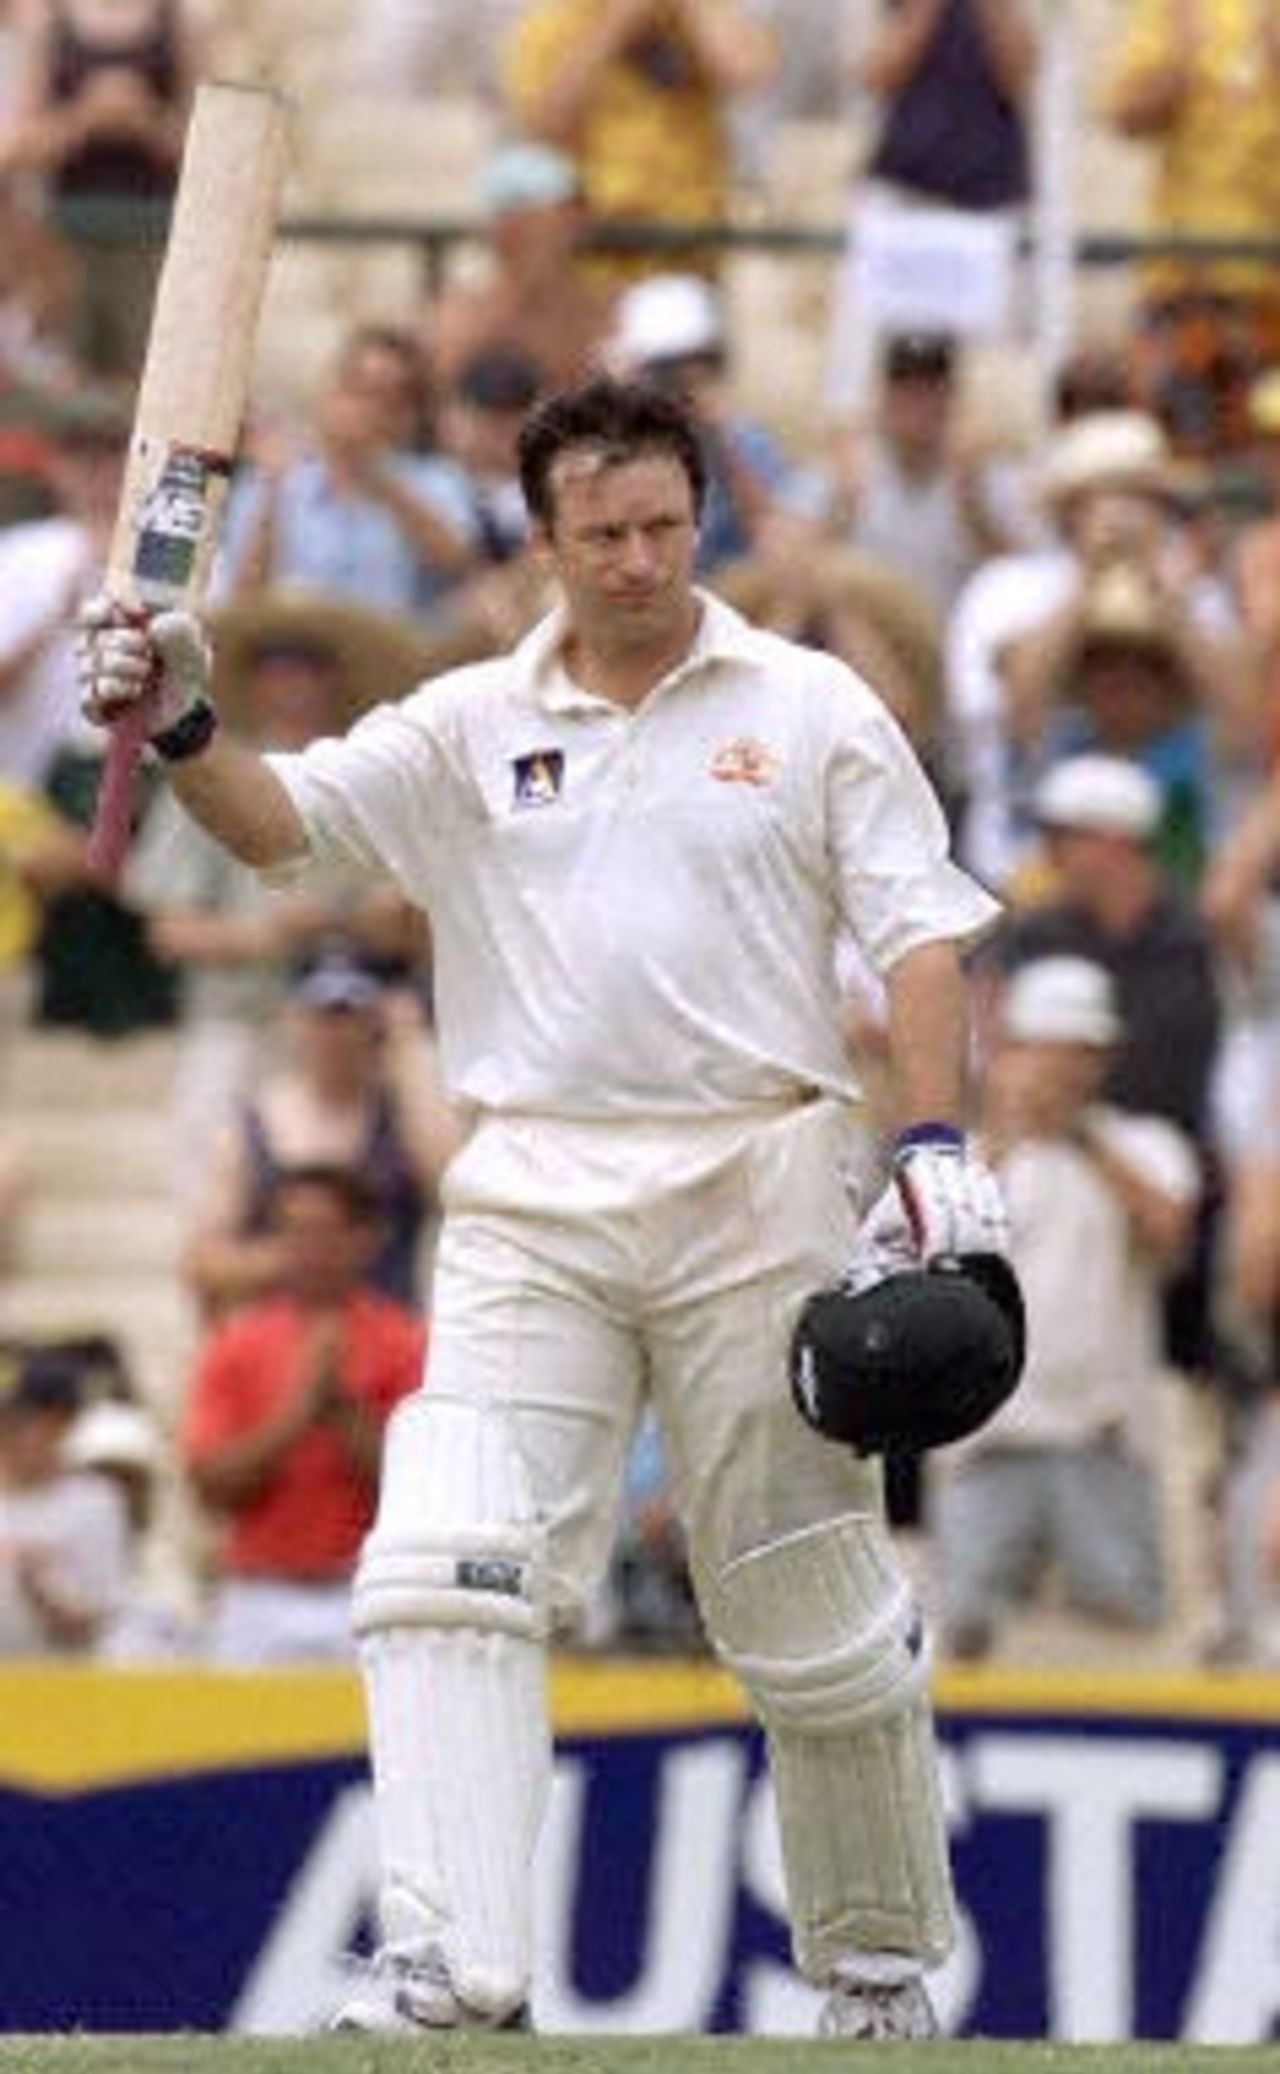 Australian captain Steve Waugh acknowledges the cheers of the crowd on making a century in the Federation test at the Sydney Cricket ground 04 January 2001. Waugh is now the fifth highest century taker in cricketing history.